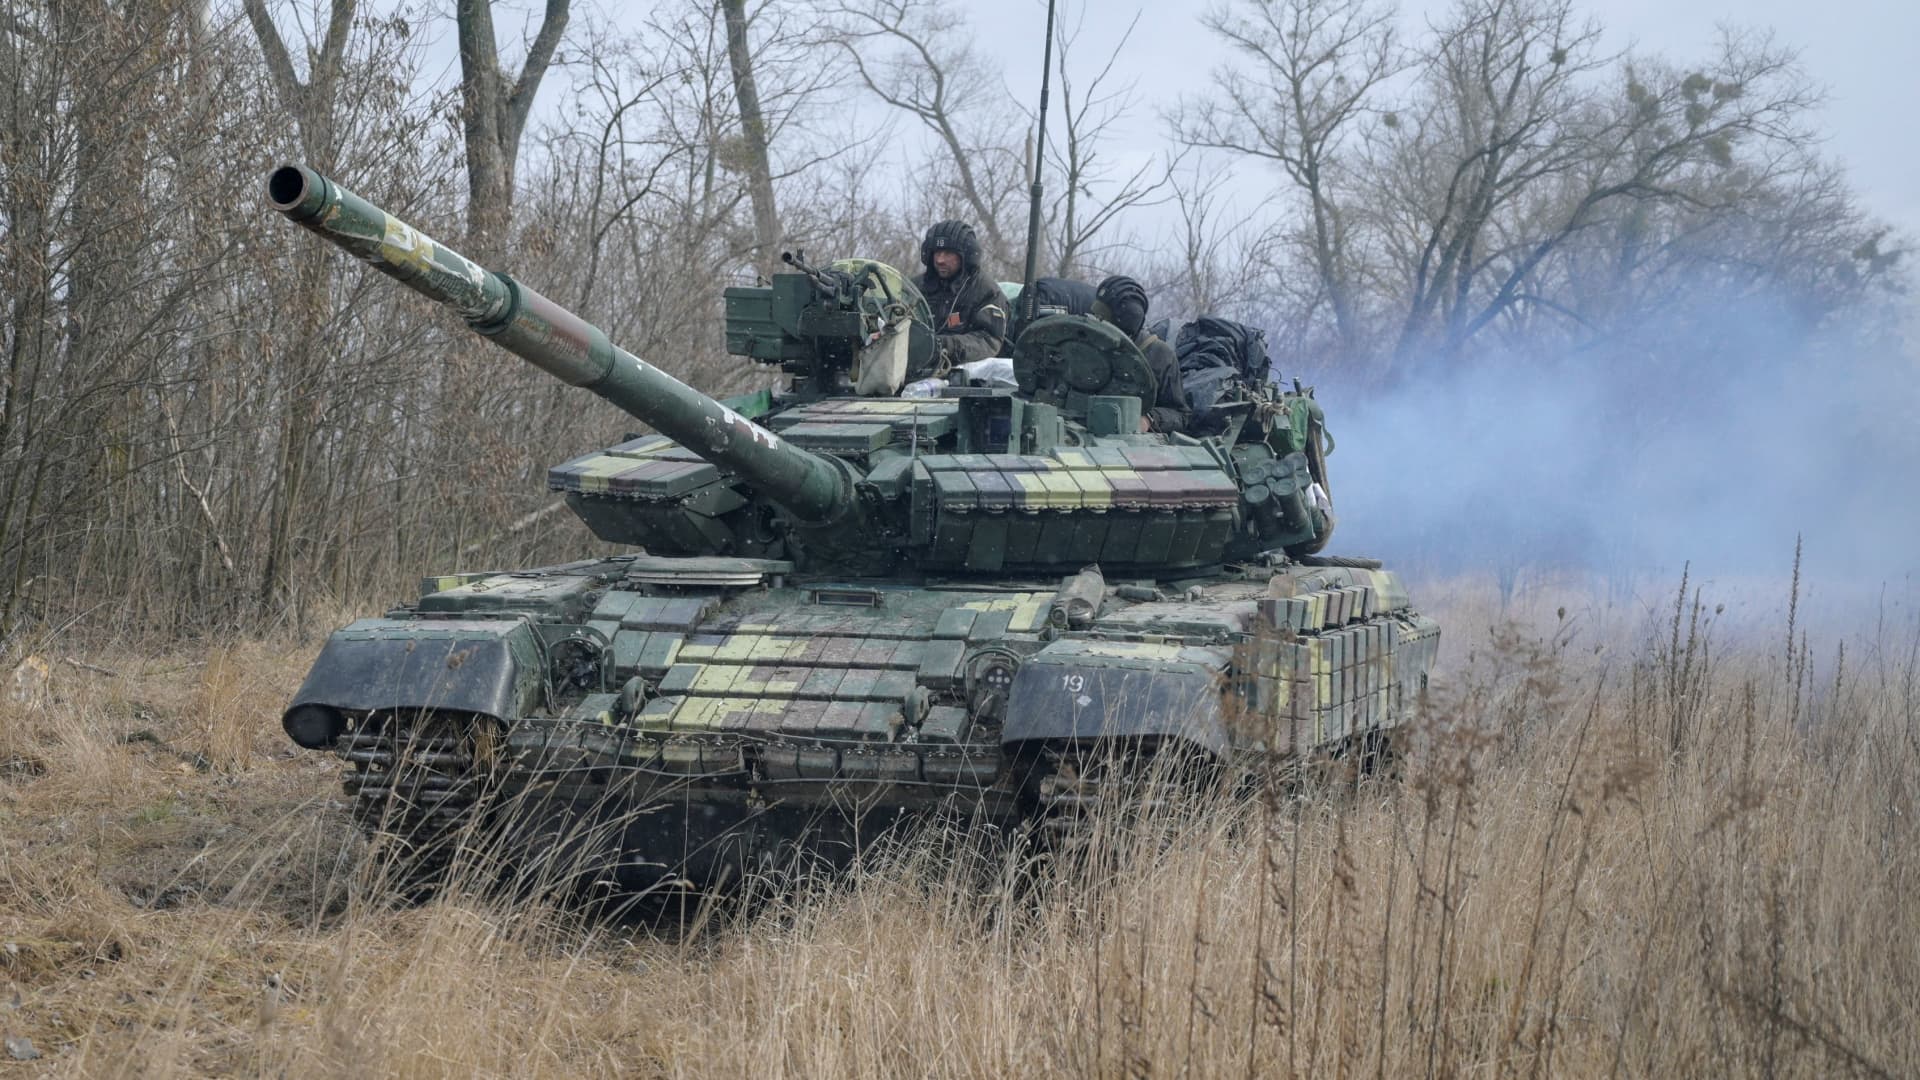 Service members of the Ukrainian armed forces are seen atop of a tank at their positions outside the settlement of Makariv, amid the Russian invasion of Ukraine, near Zhytomyr, Ukraine March 4, 2022.